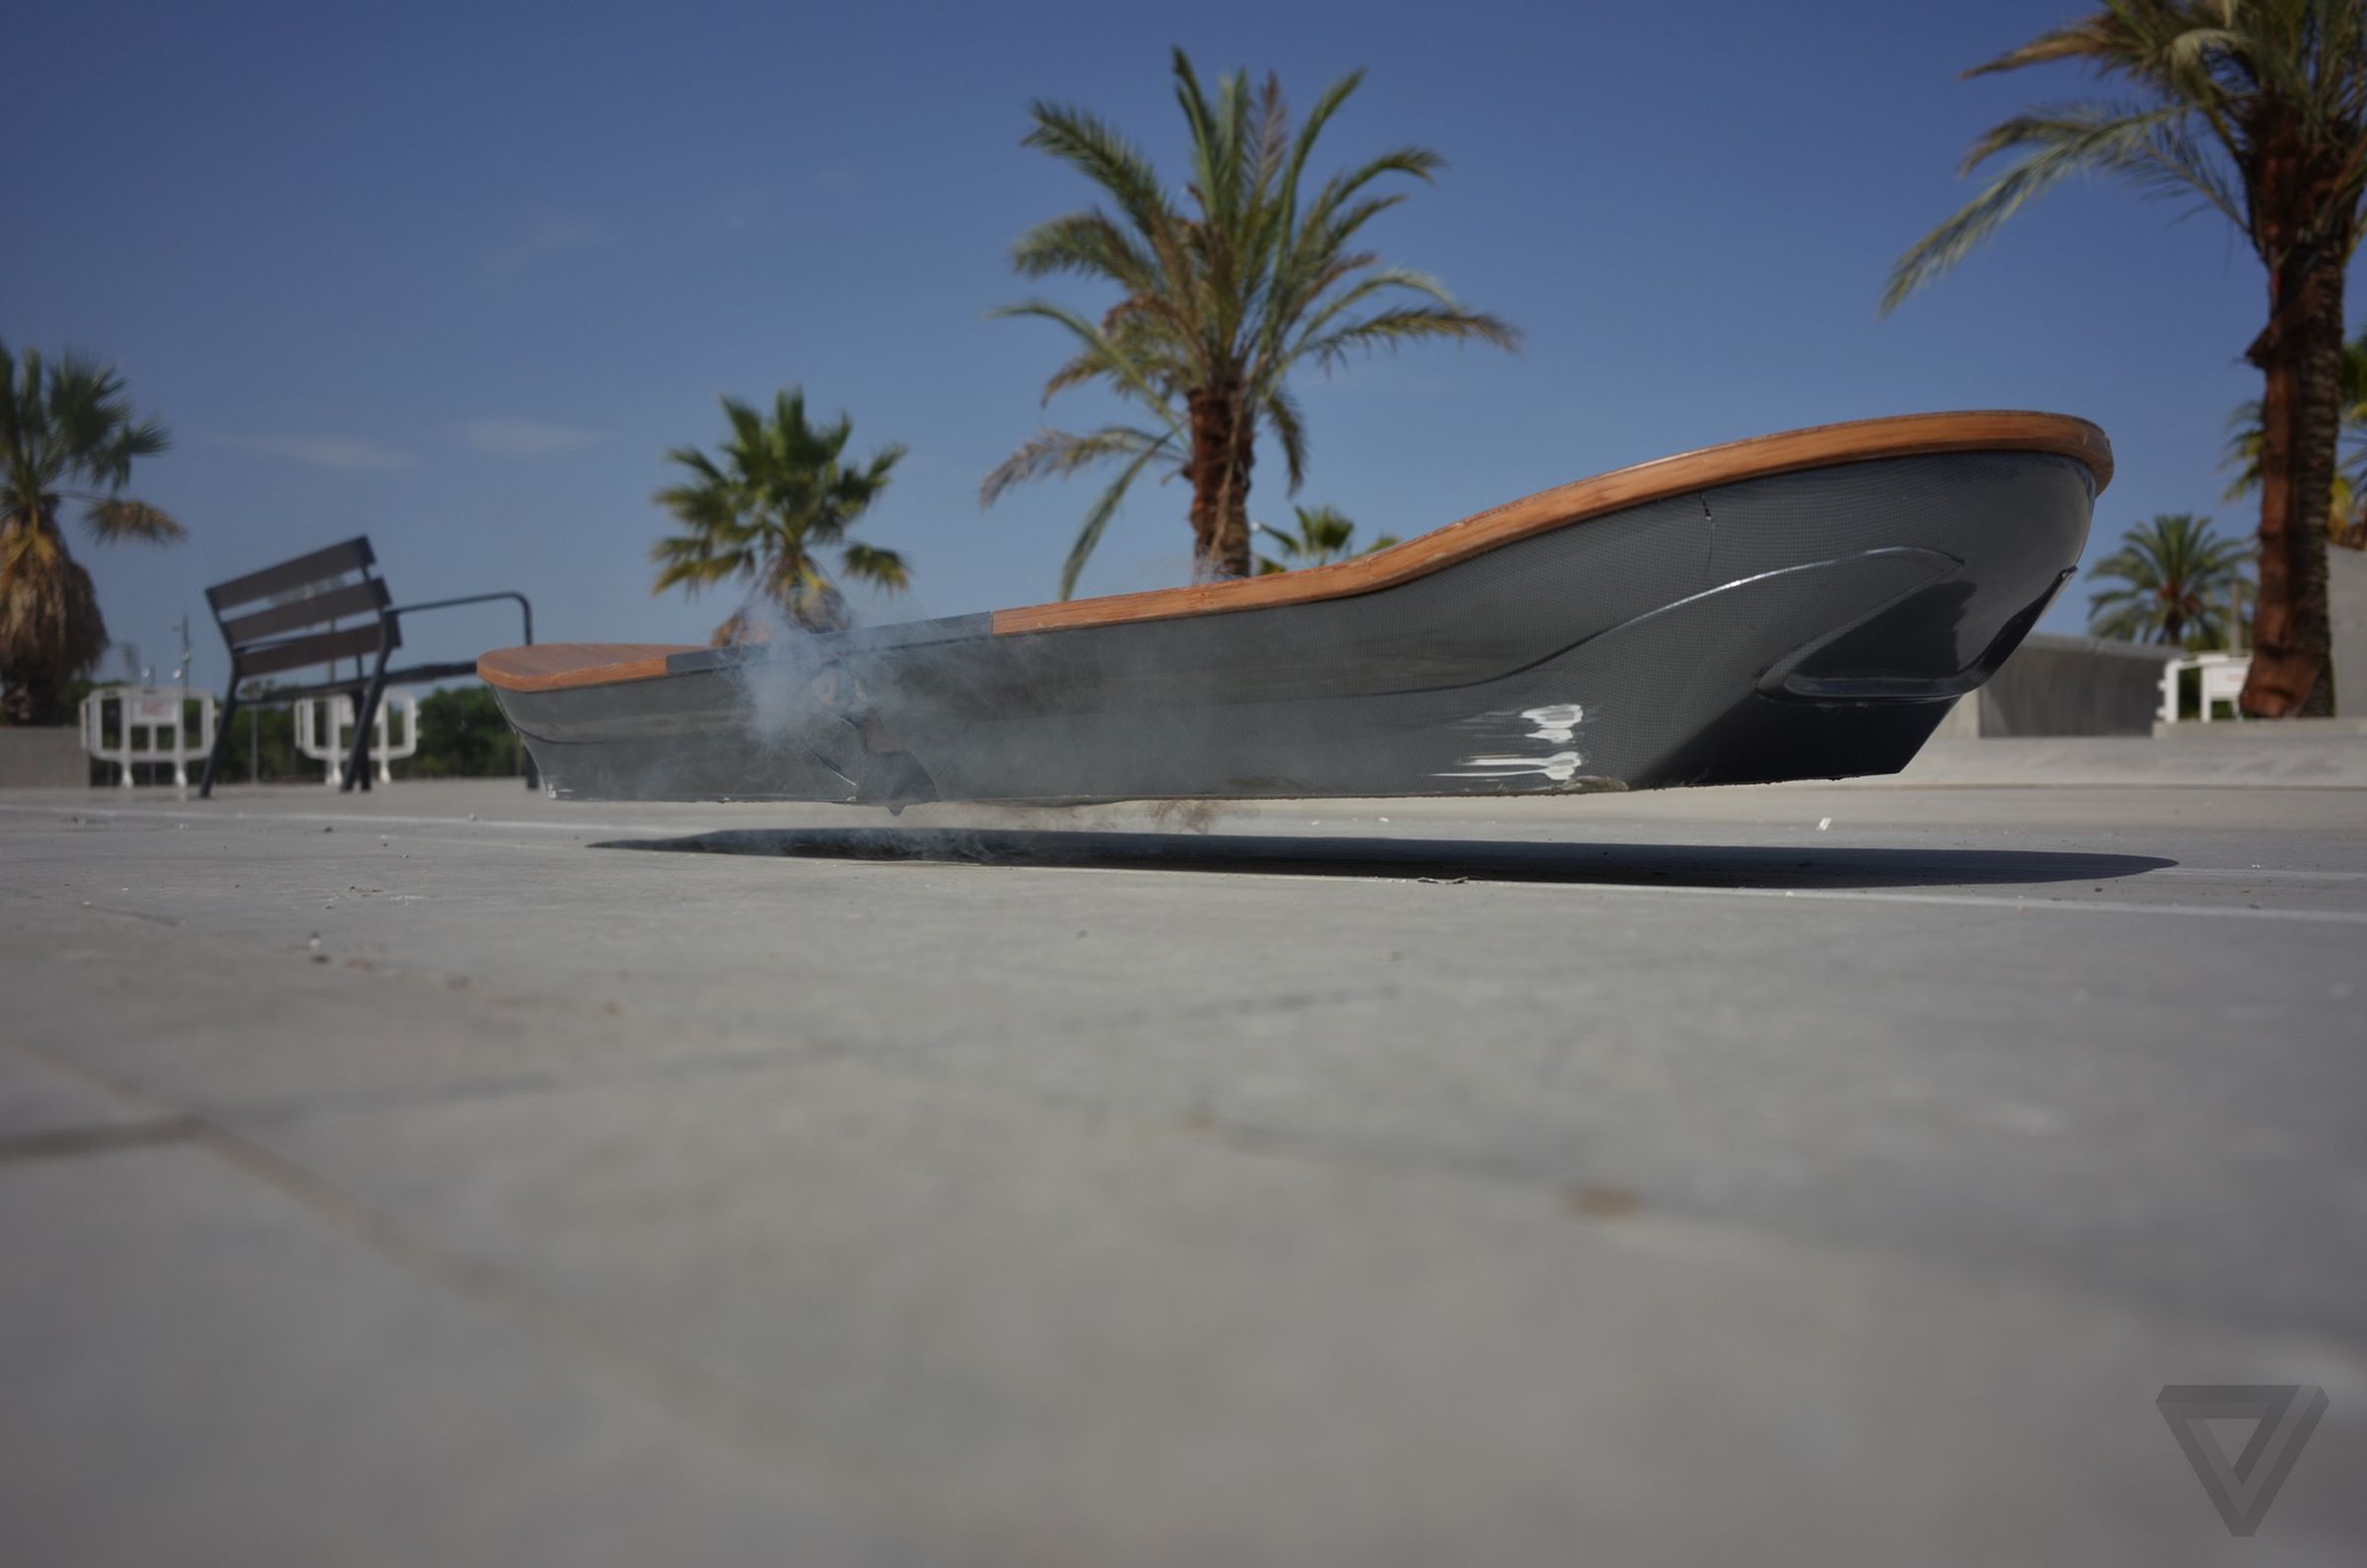 Lexus hoverboard and hoverpark pictures